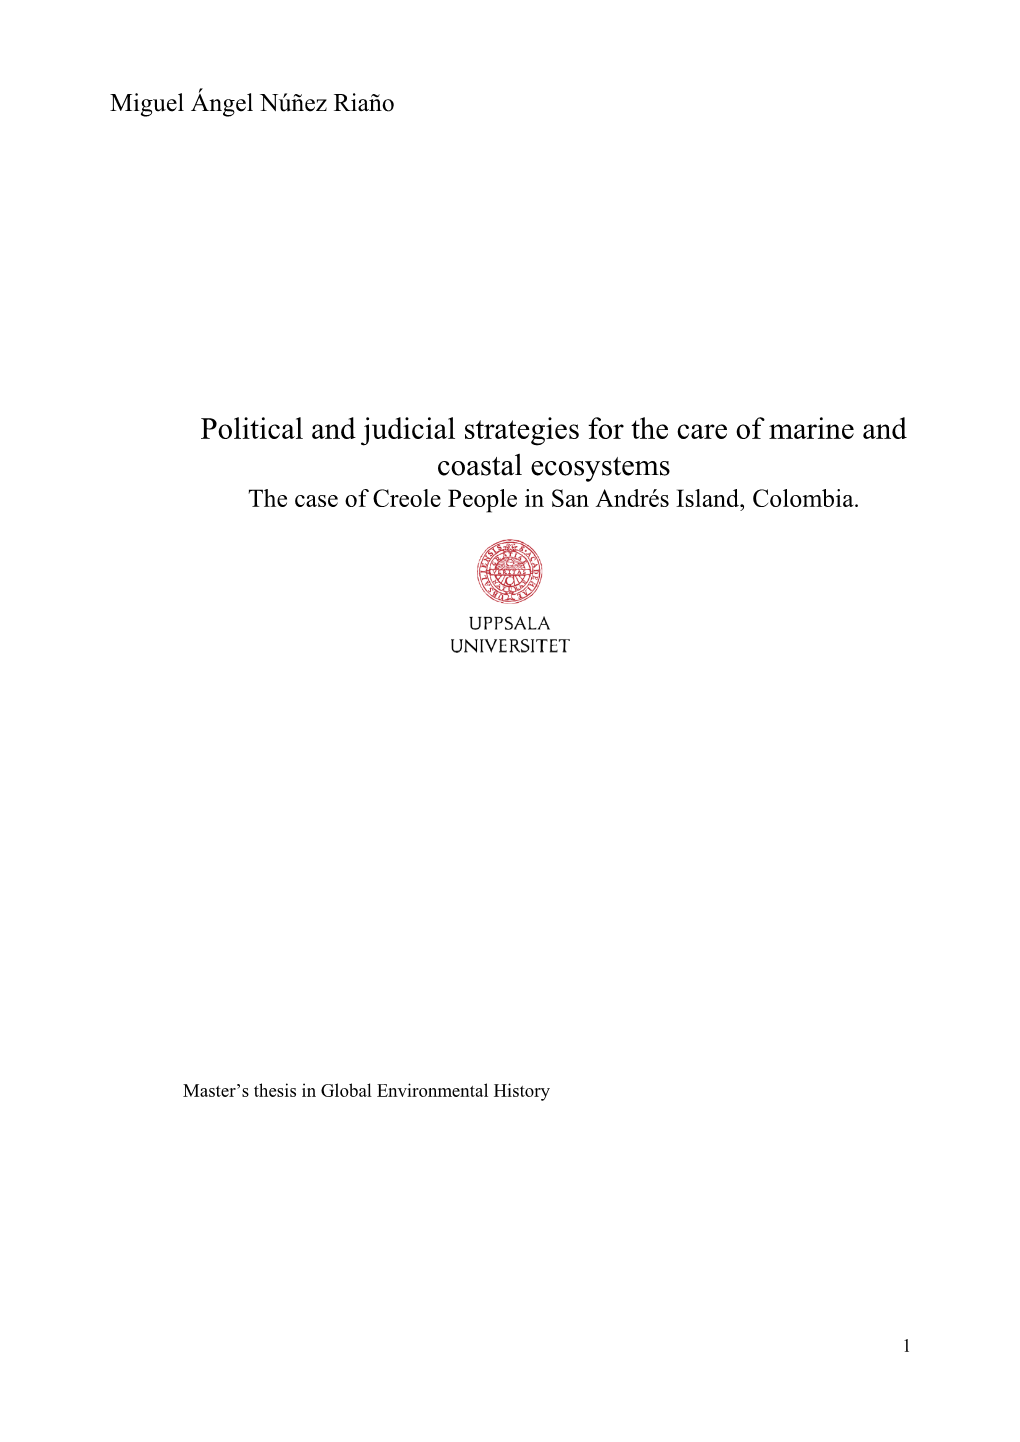 Political and Judicial Strategies for the Care of Marine and Coastal Ecosystems. the Case of the Creole People in San Andrés